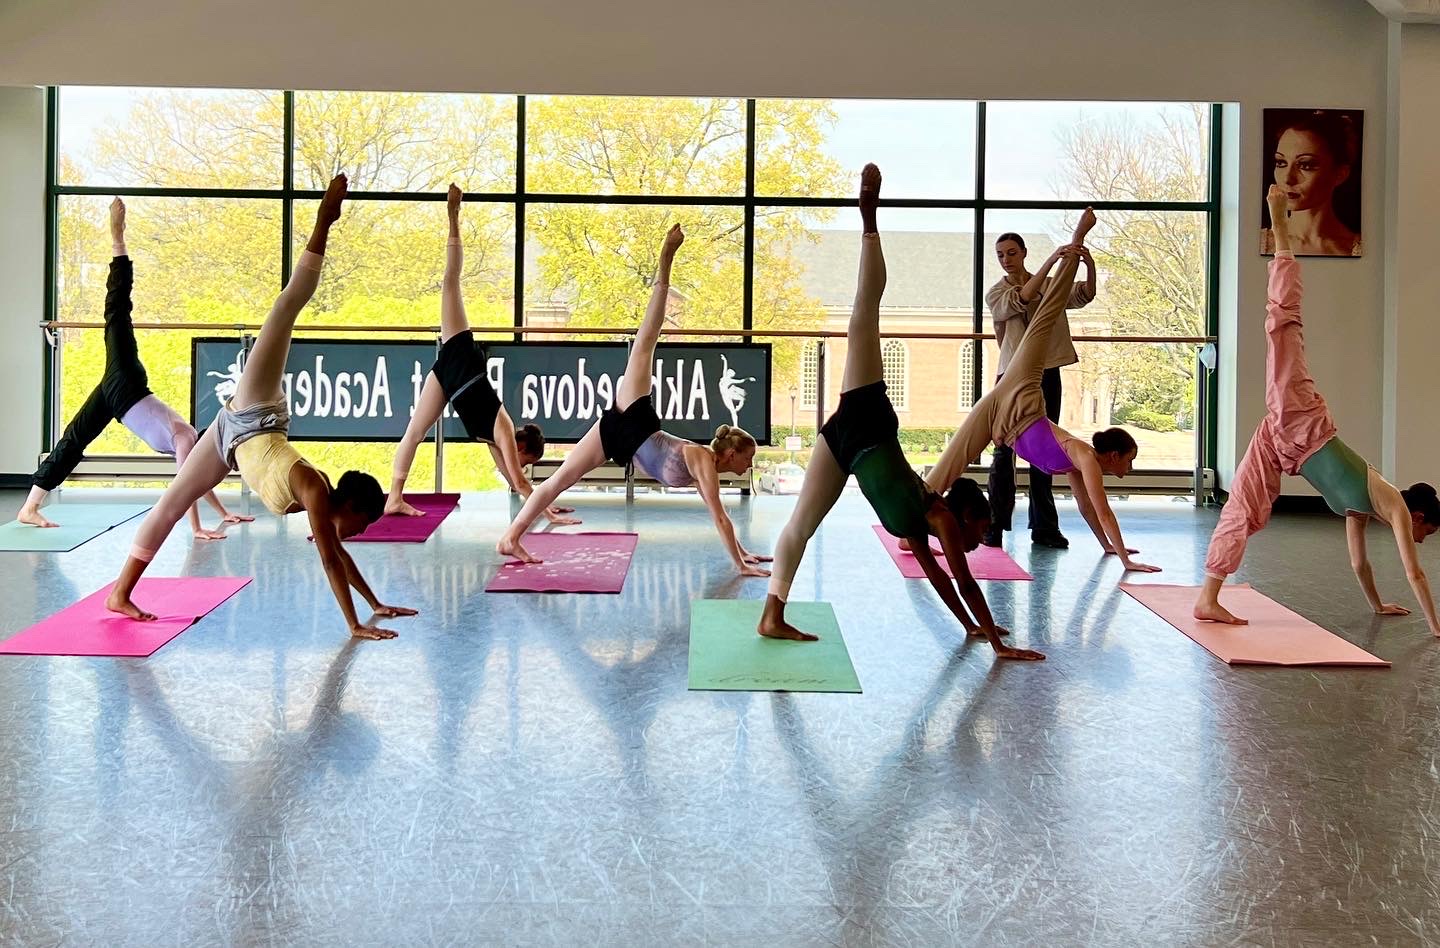 Gallery 2 - Adult Pilates Classes